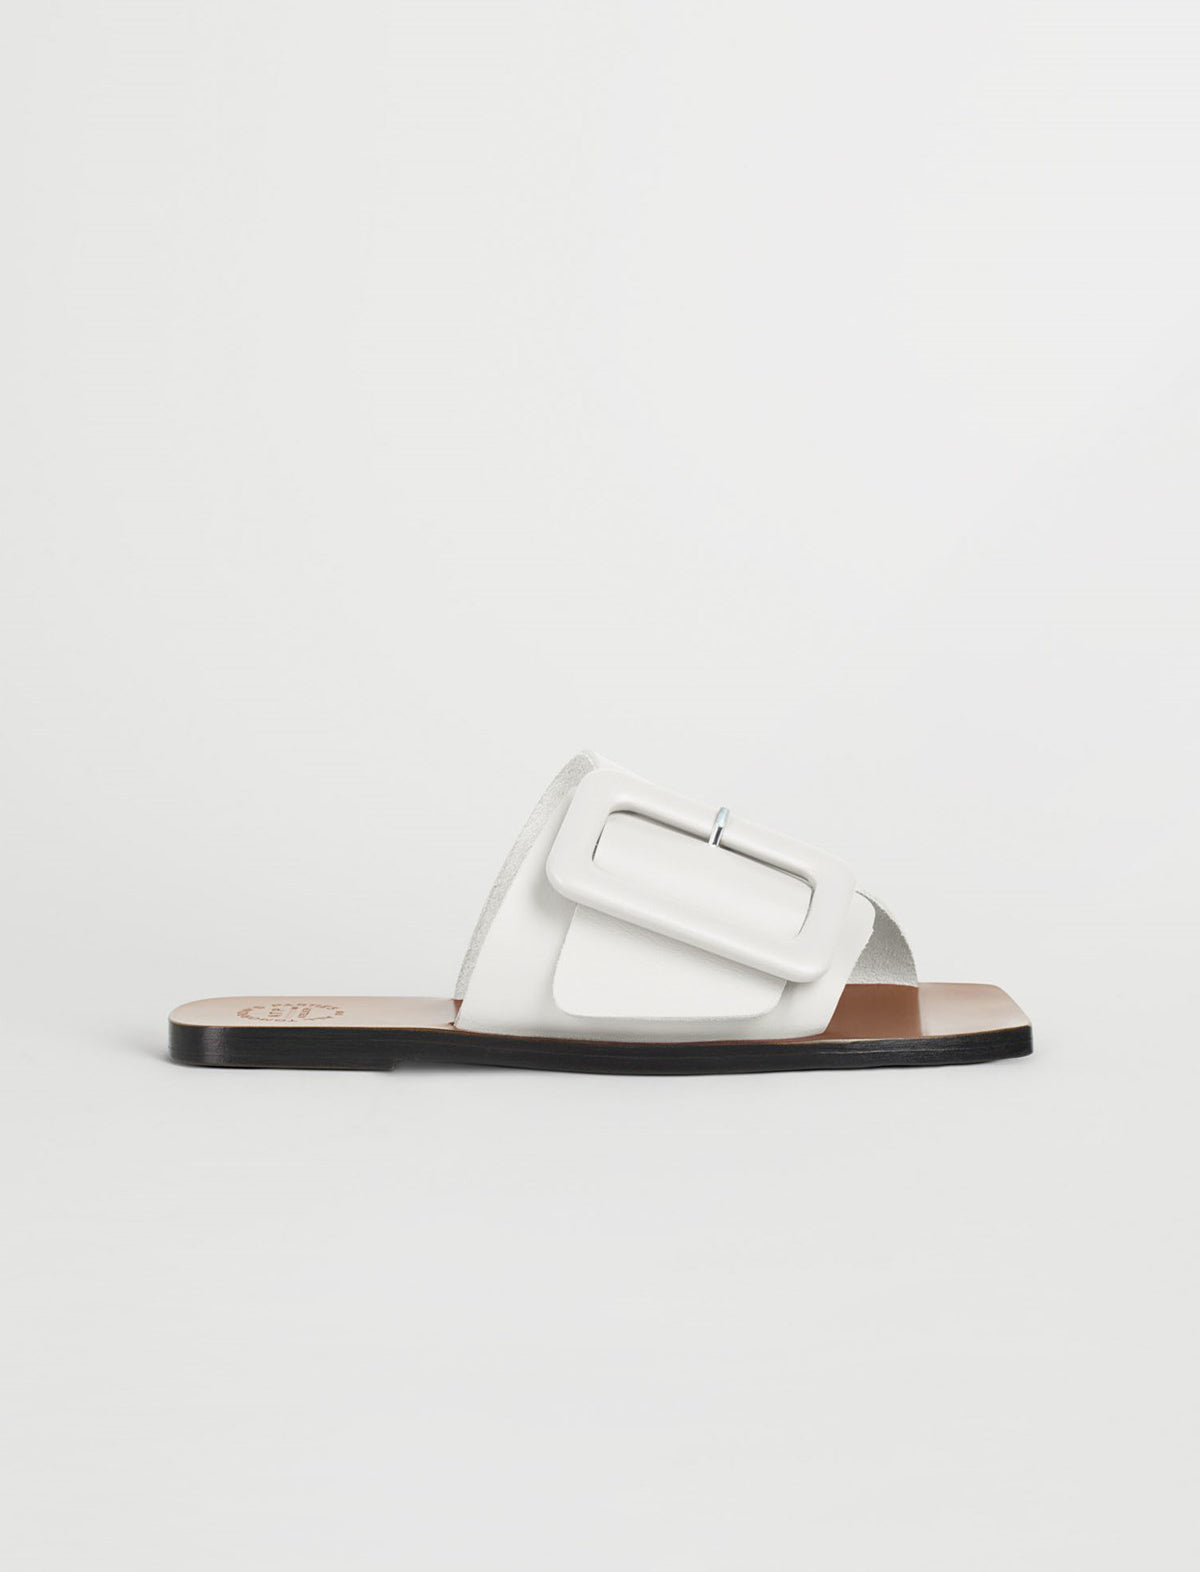 ATP Atelier Ceci Buckled Flat Sandals in White